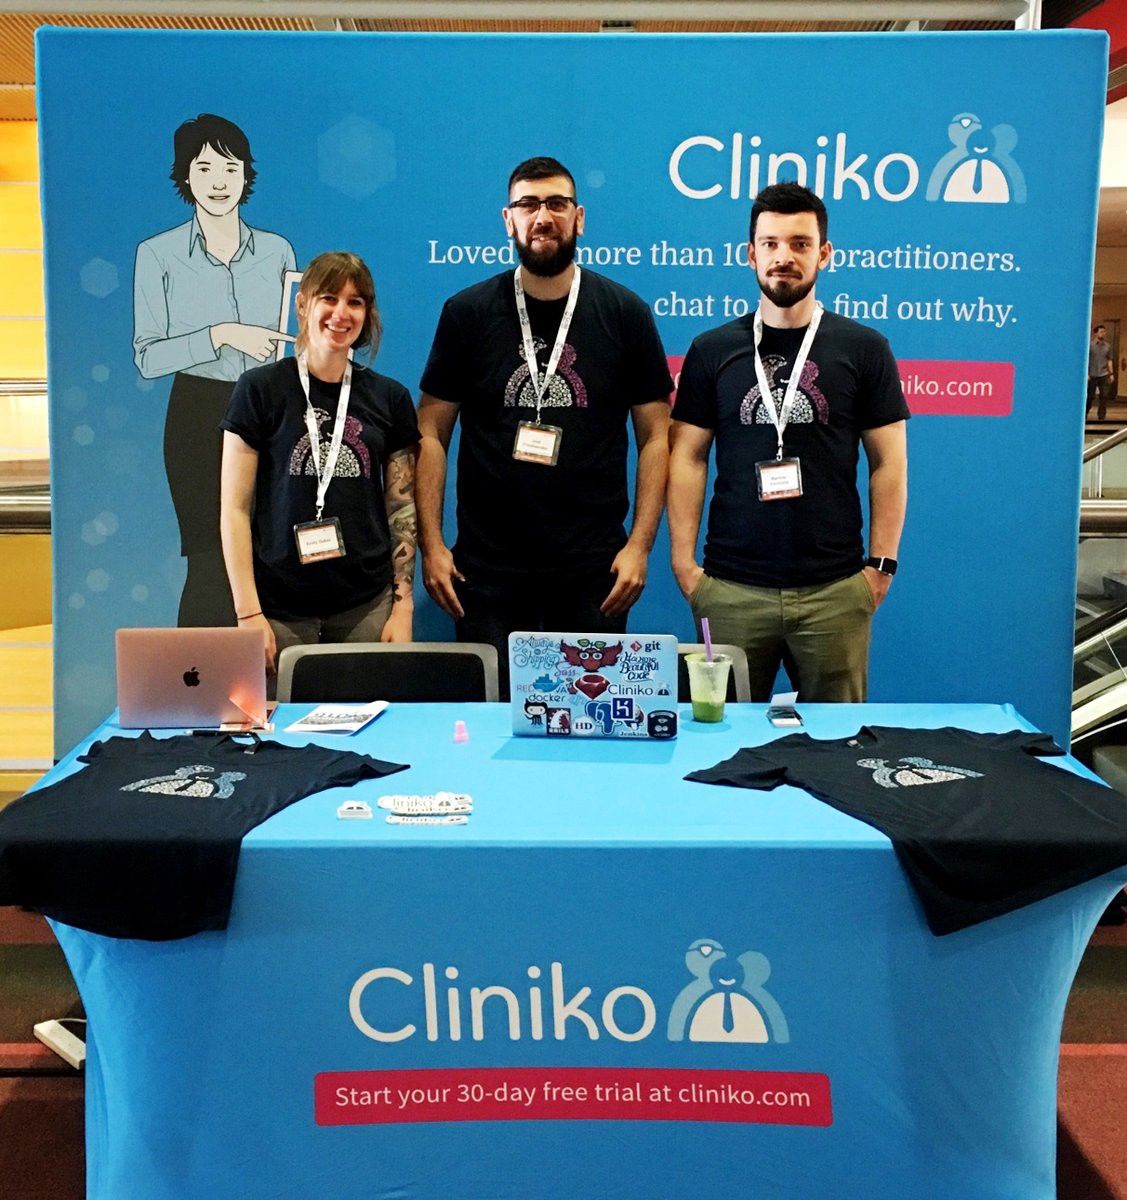 Part of the Cliniko team at a conference booth